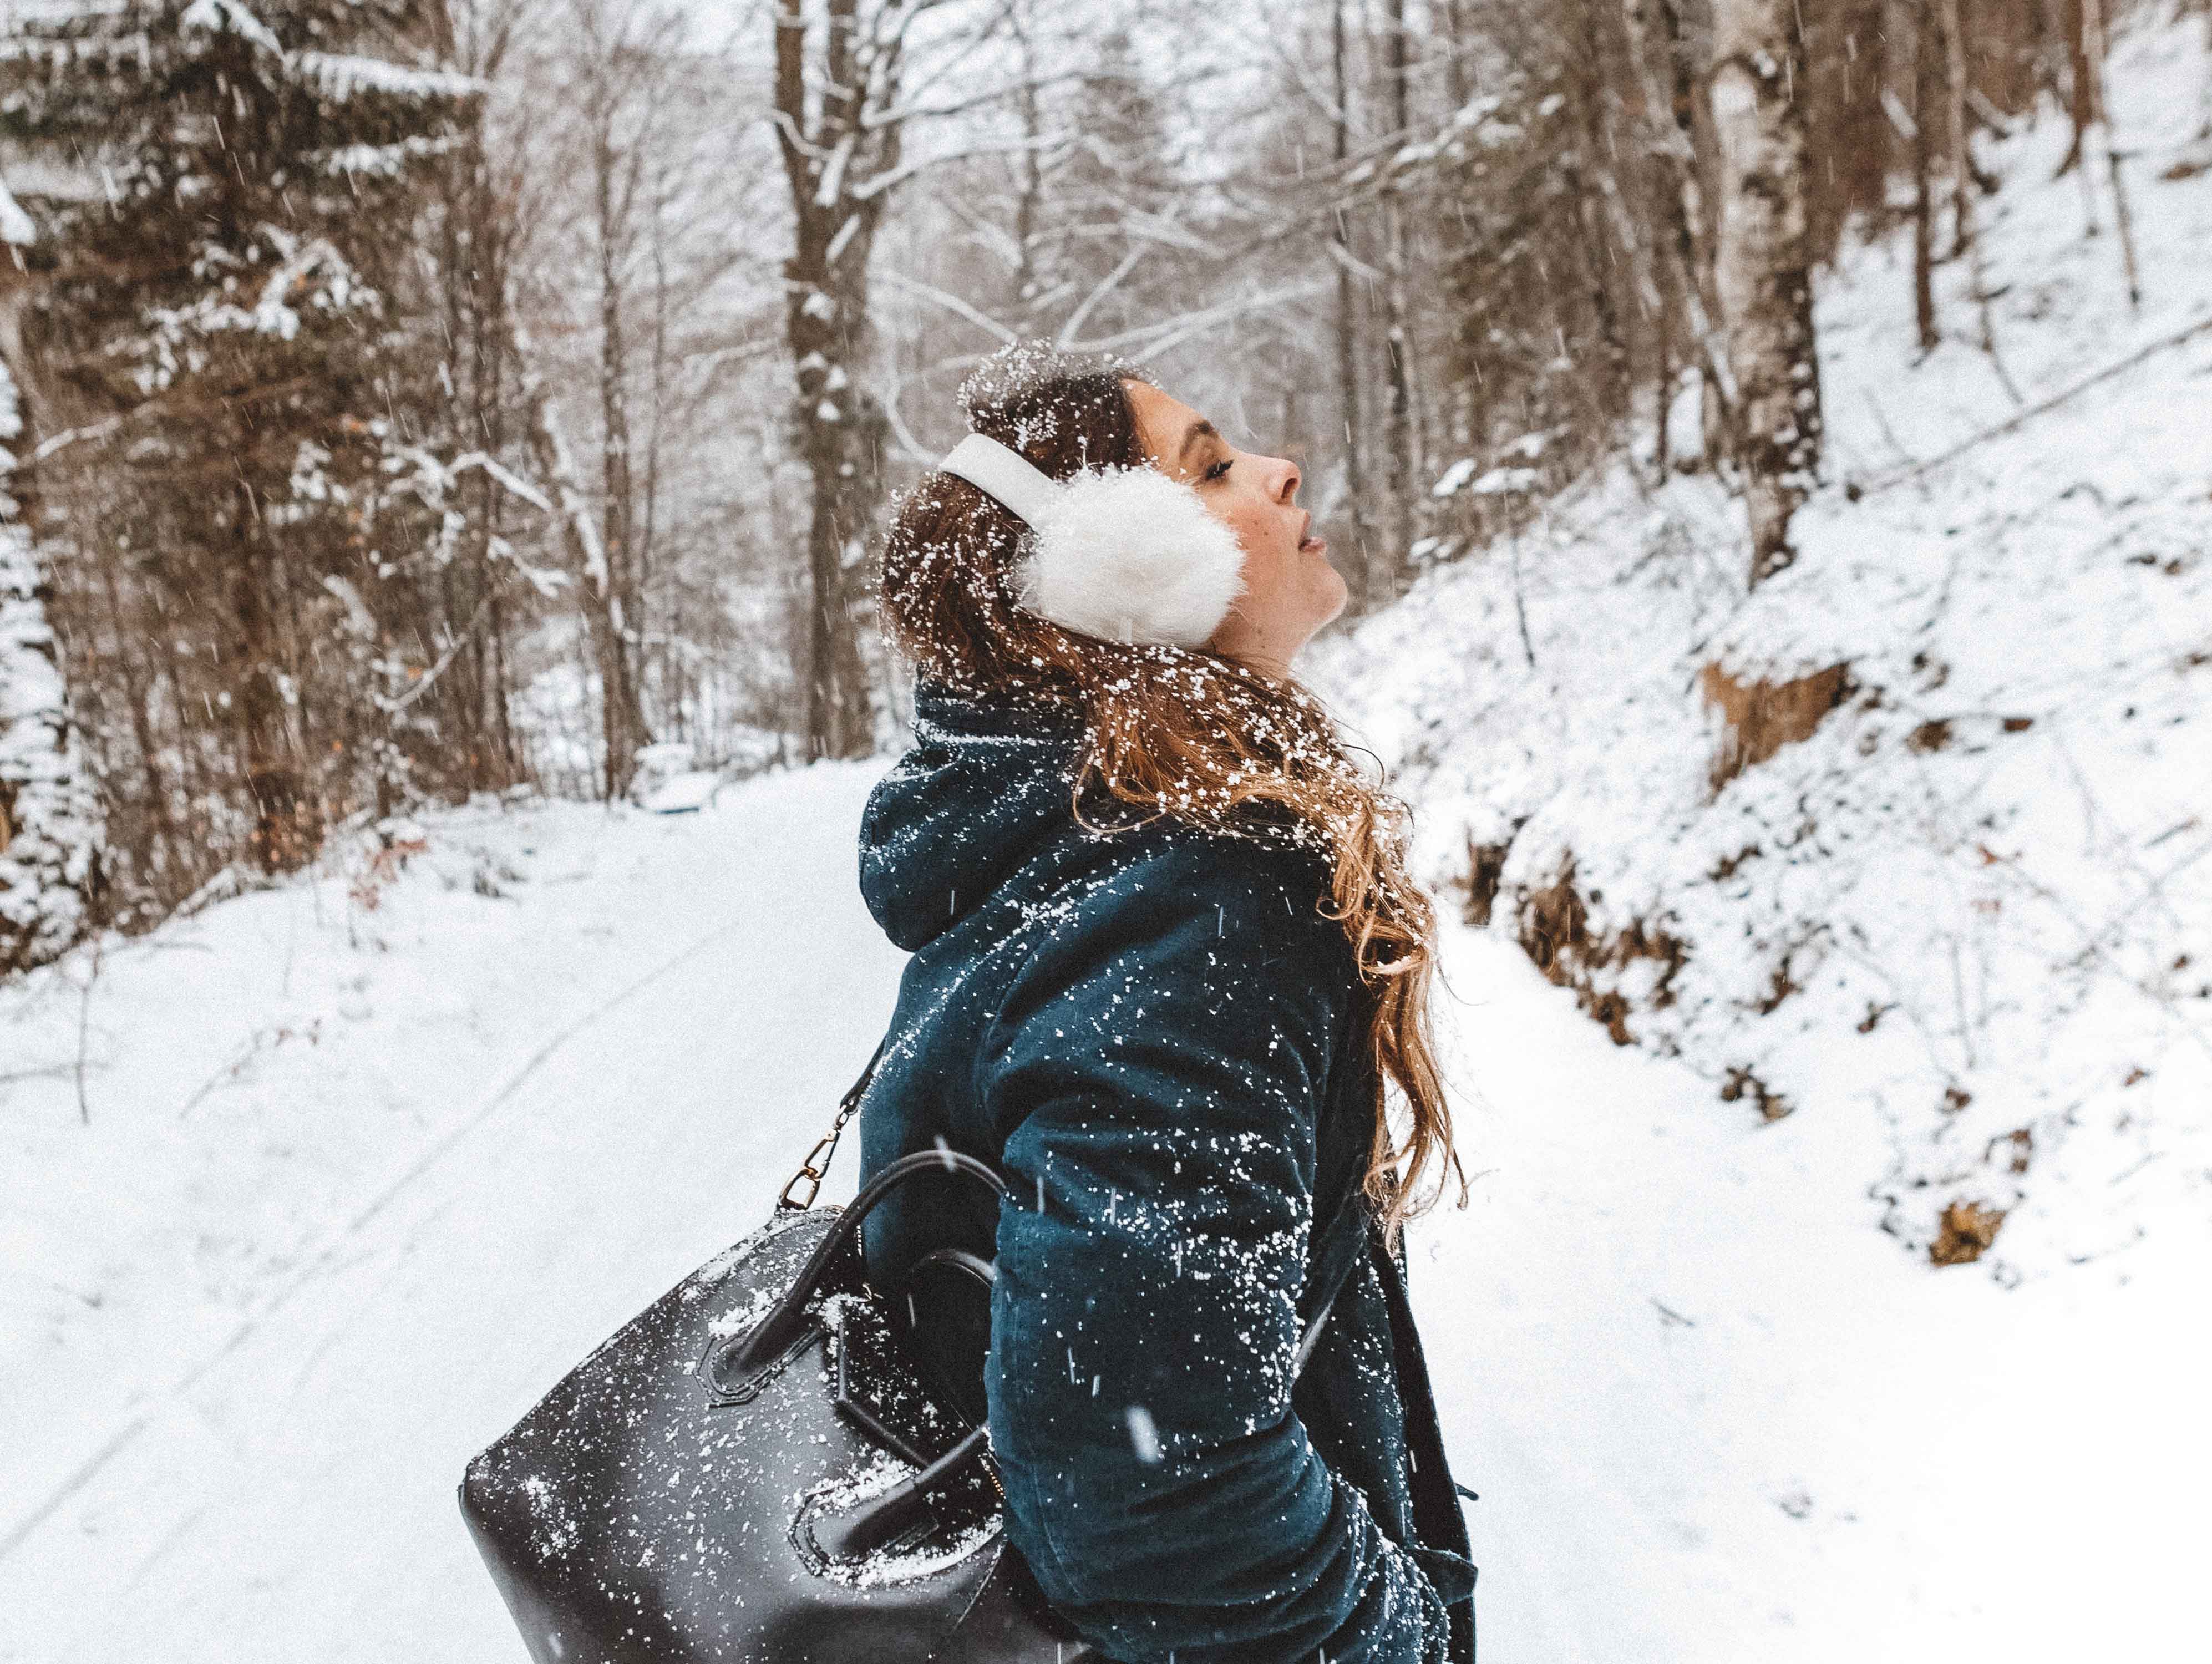 Image credit: https://www.pexels.com/photo/woman-standing-in-snowy-forest-6809023/